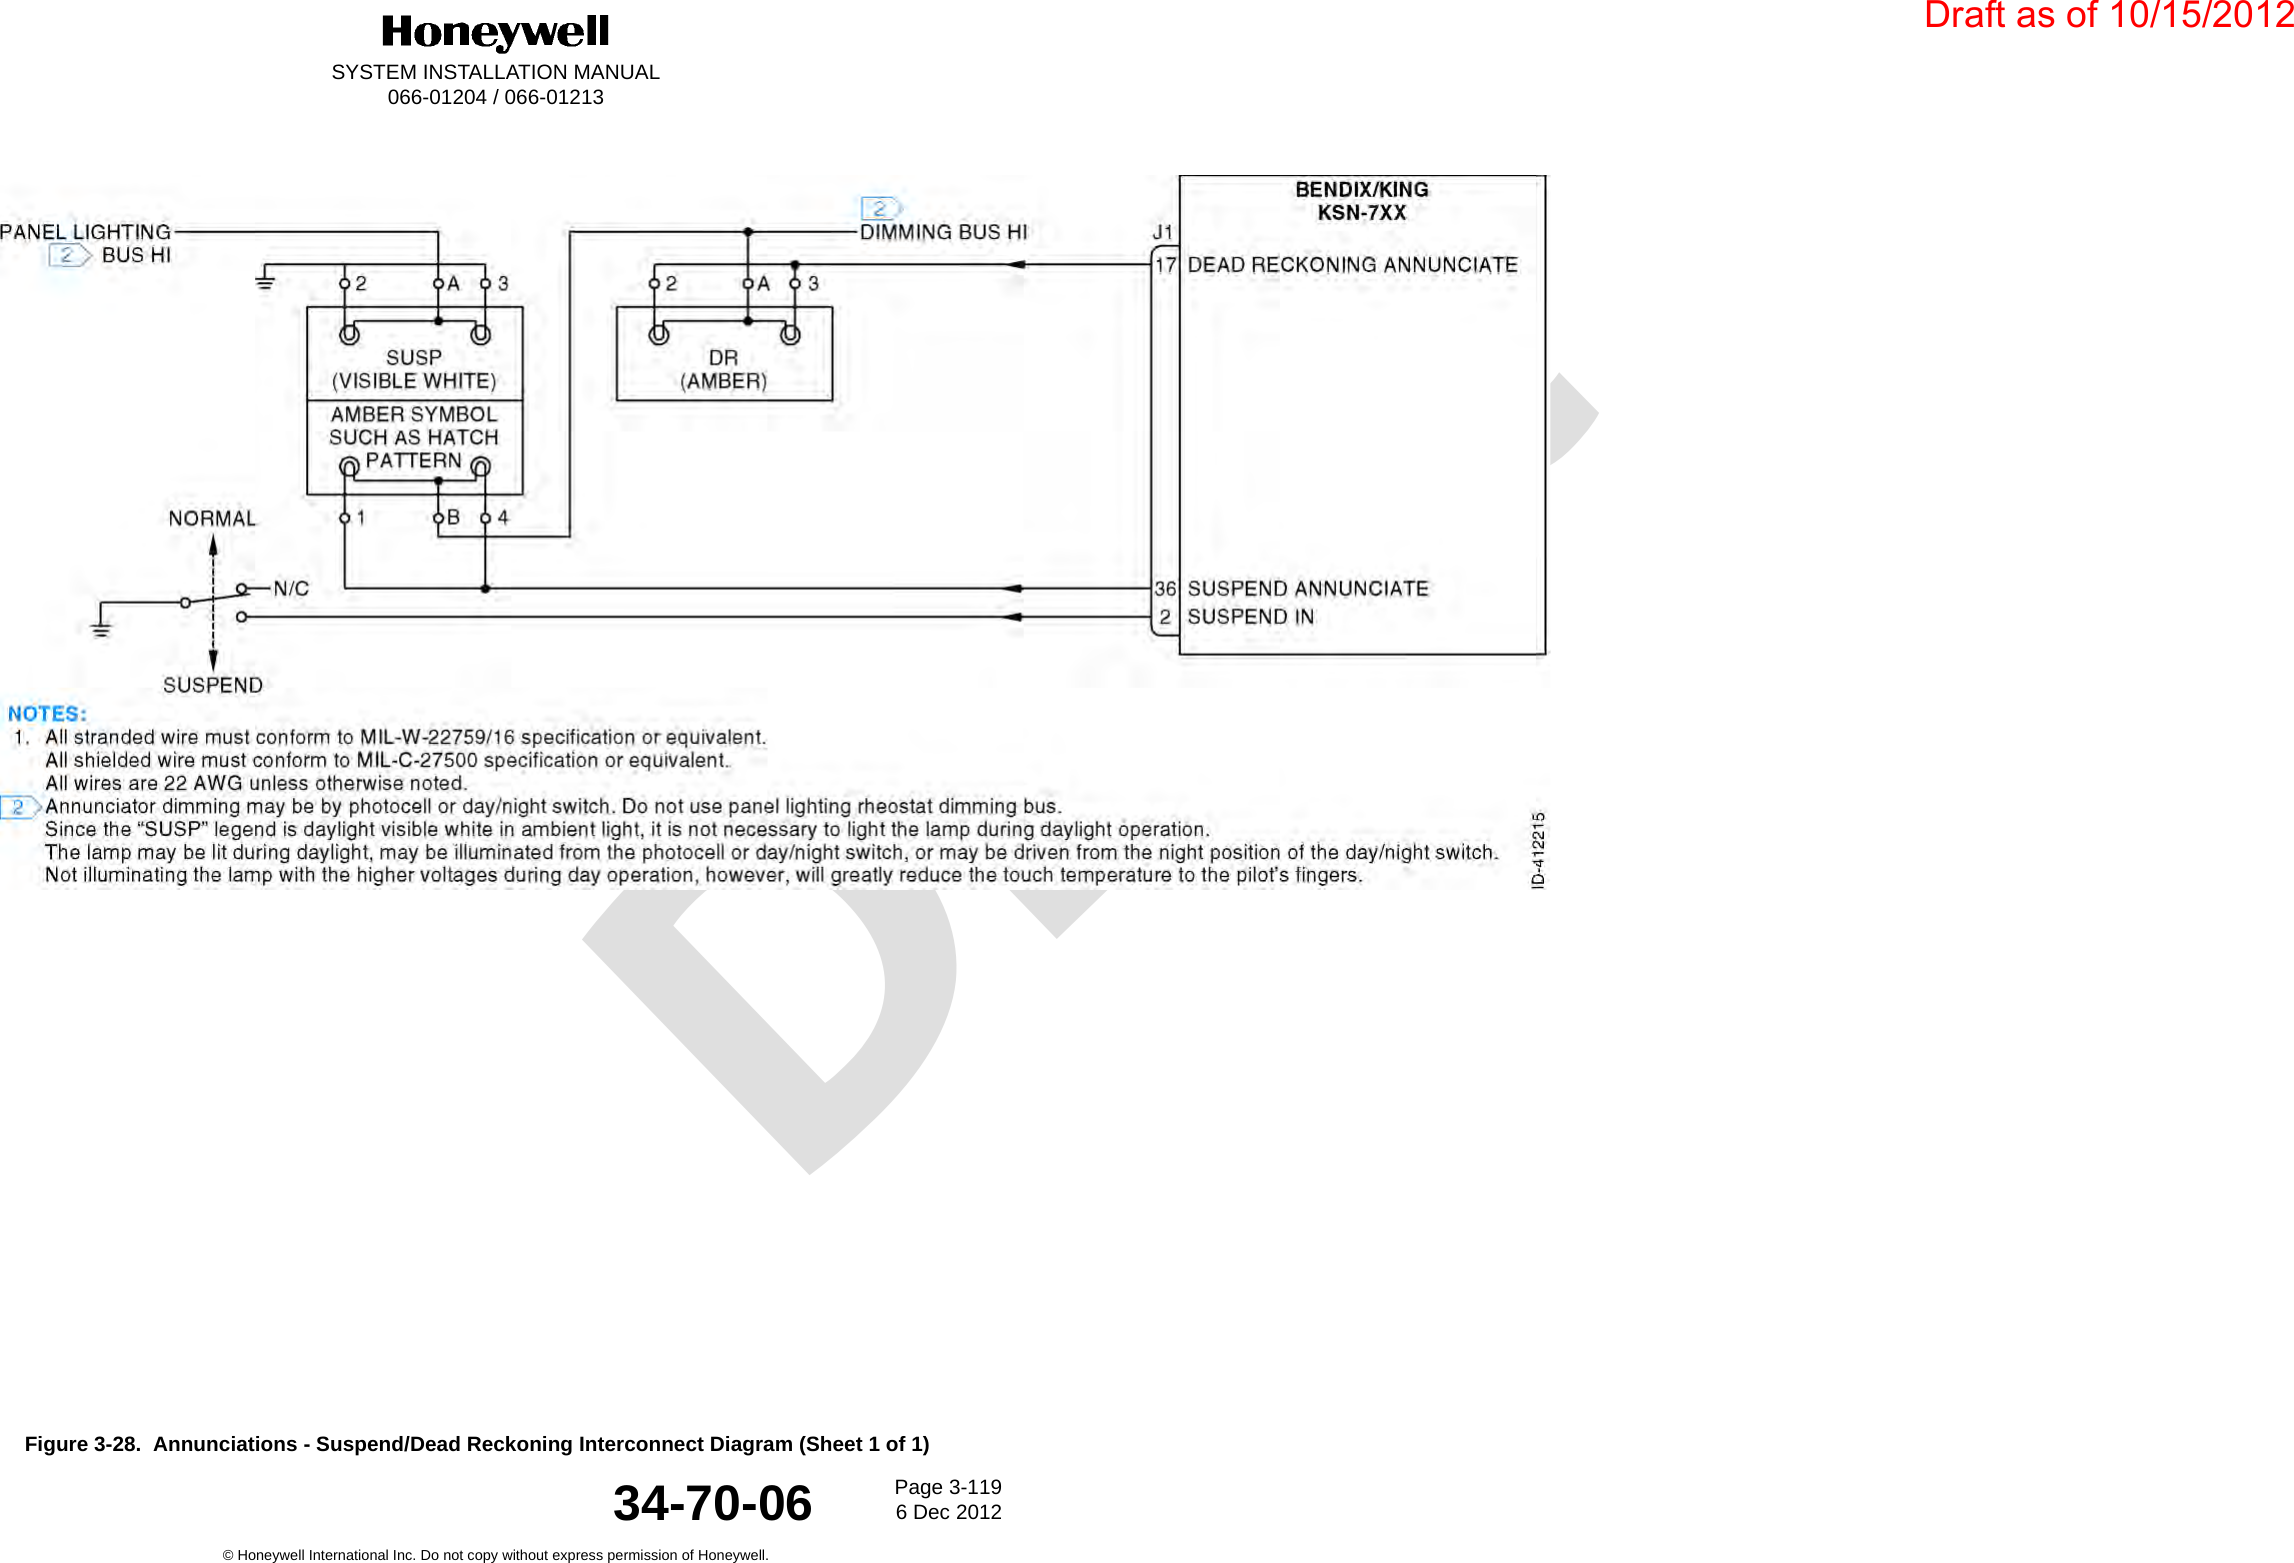 DraftSYSTEM INSTALLATION MANUAL066-01204 / 066-01213Page 3-1196 Dec 2012© Honeywell International Inc. Do not copy without express permission of Honeywell.34-70-06Figure 3-28.  Annunciations - Suspend/Dead Reckoning Interconnect Diagram (Sheet 1 of 1)Draft as of 10/15/2012